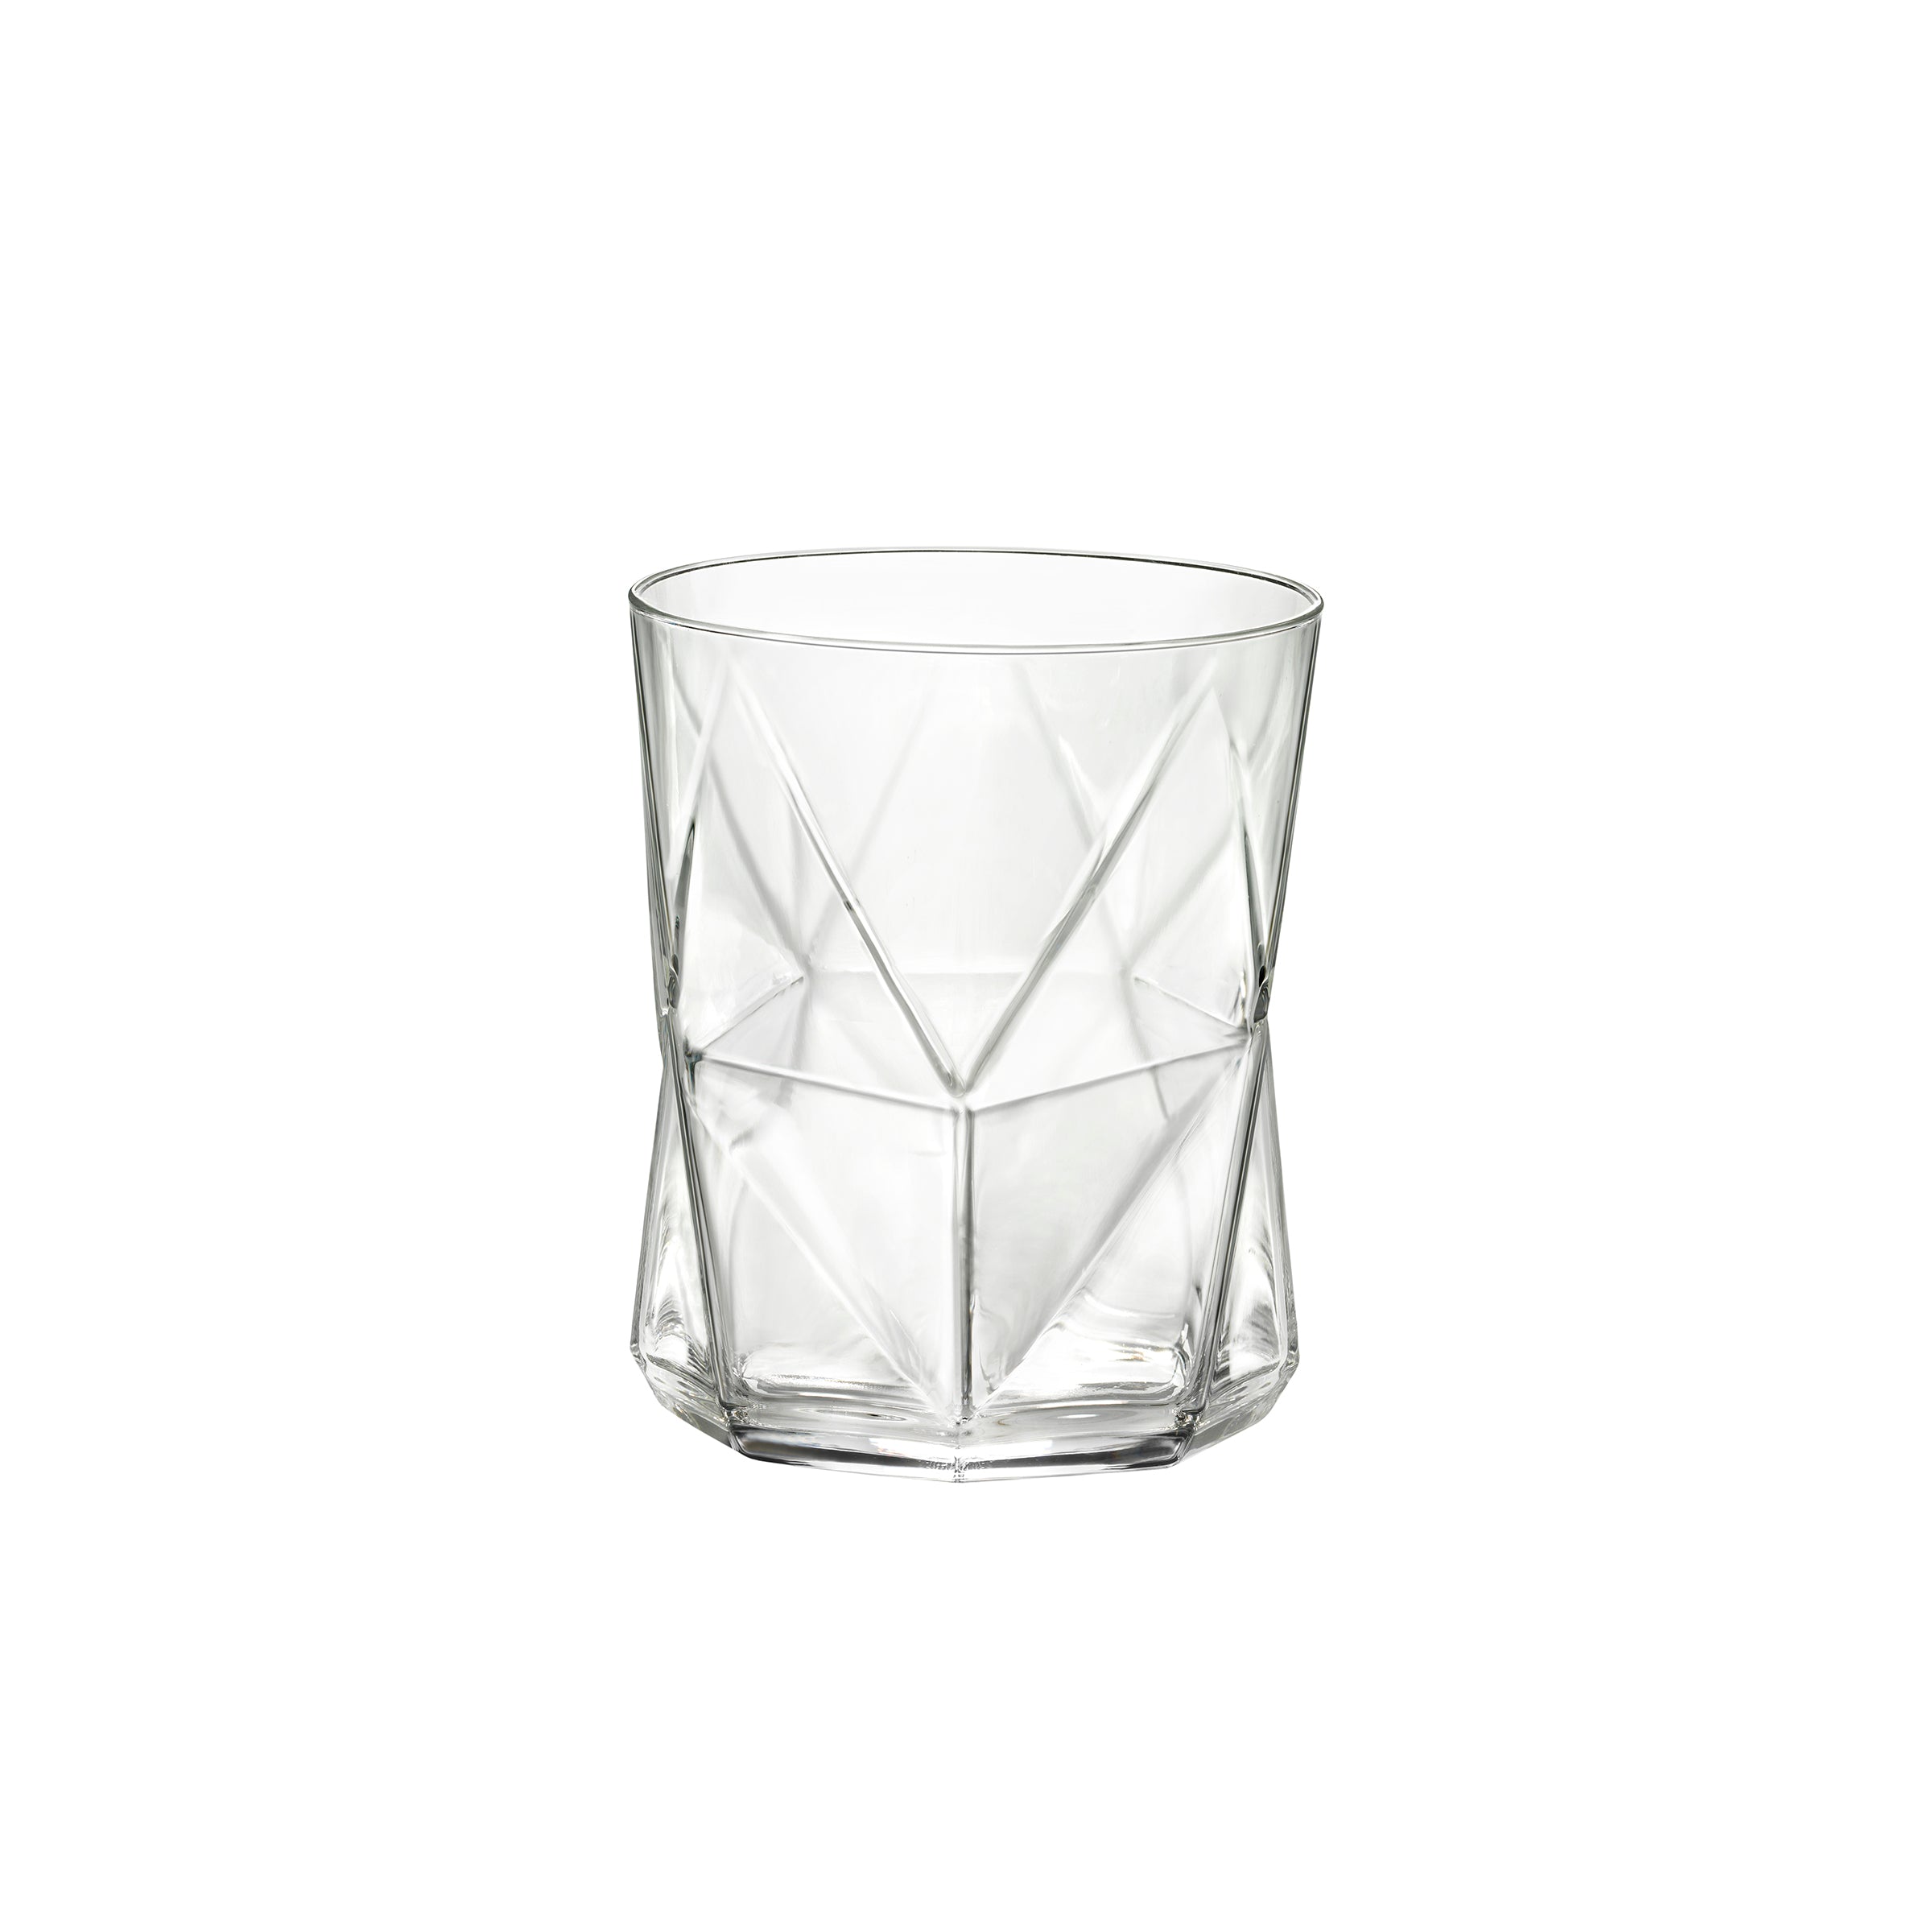 Bormioli Rocco Lounge DOF Glass, Set Of 4, 13.5 Oz, Clear, For  Whiskey, Bourbon,Juice, And Water, Made In Italy.: Mixed Drinkware Sets